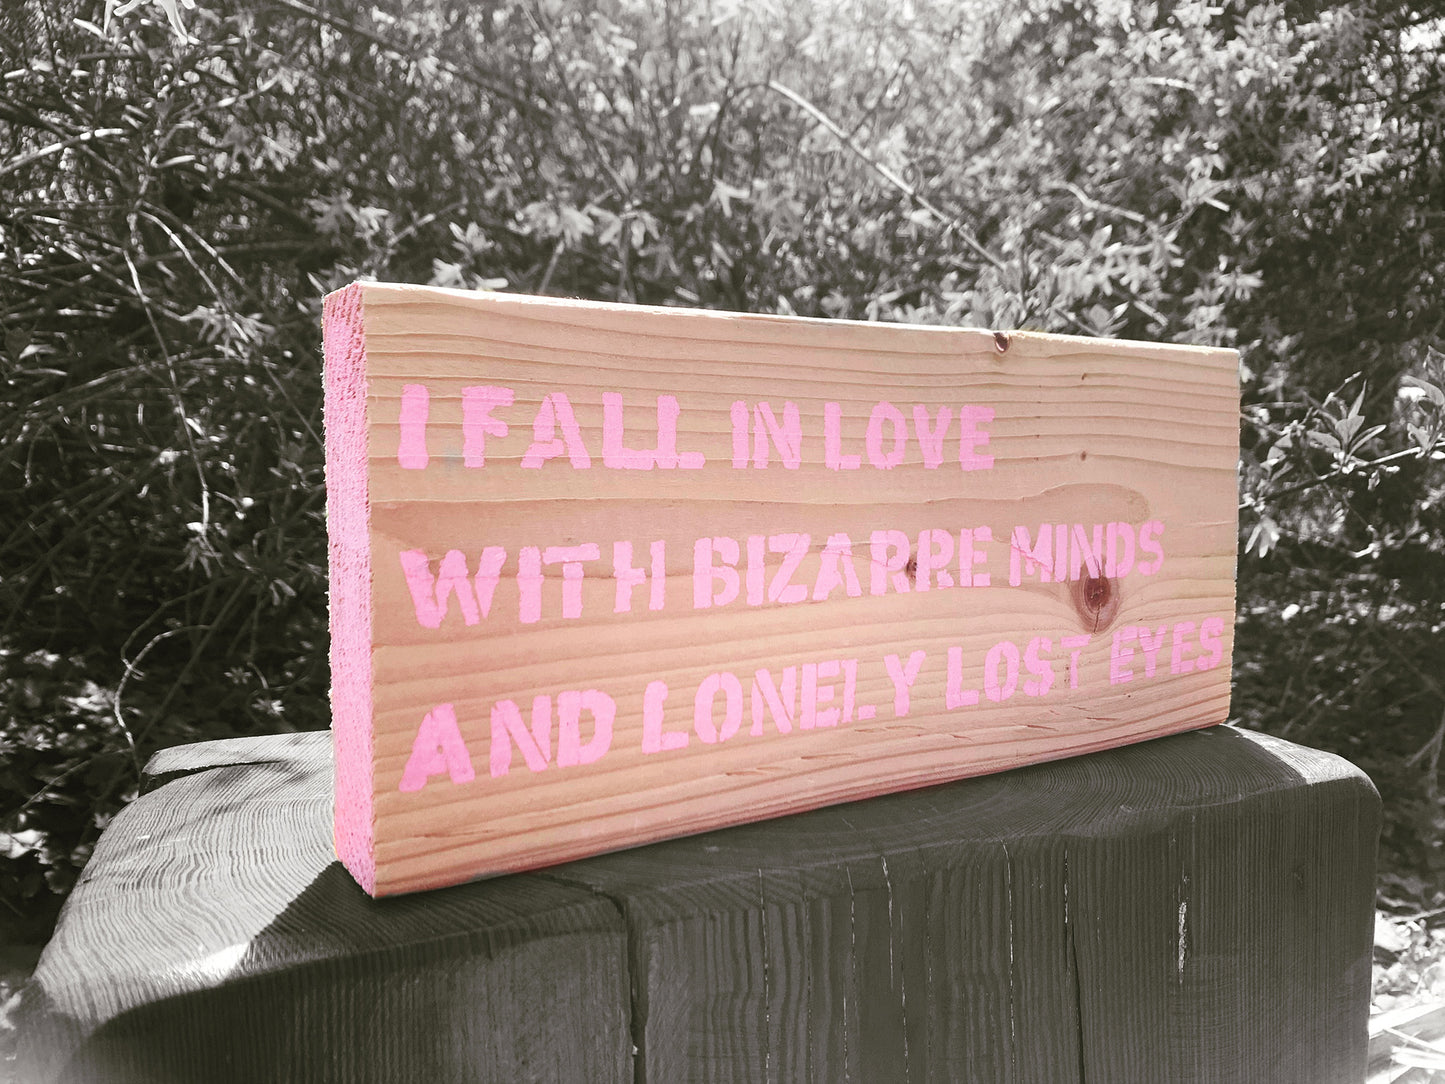 Lost eyes wood quote